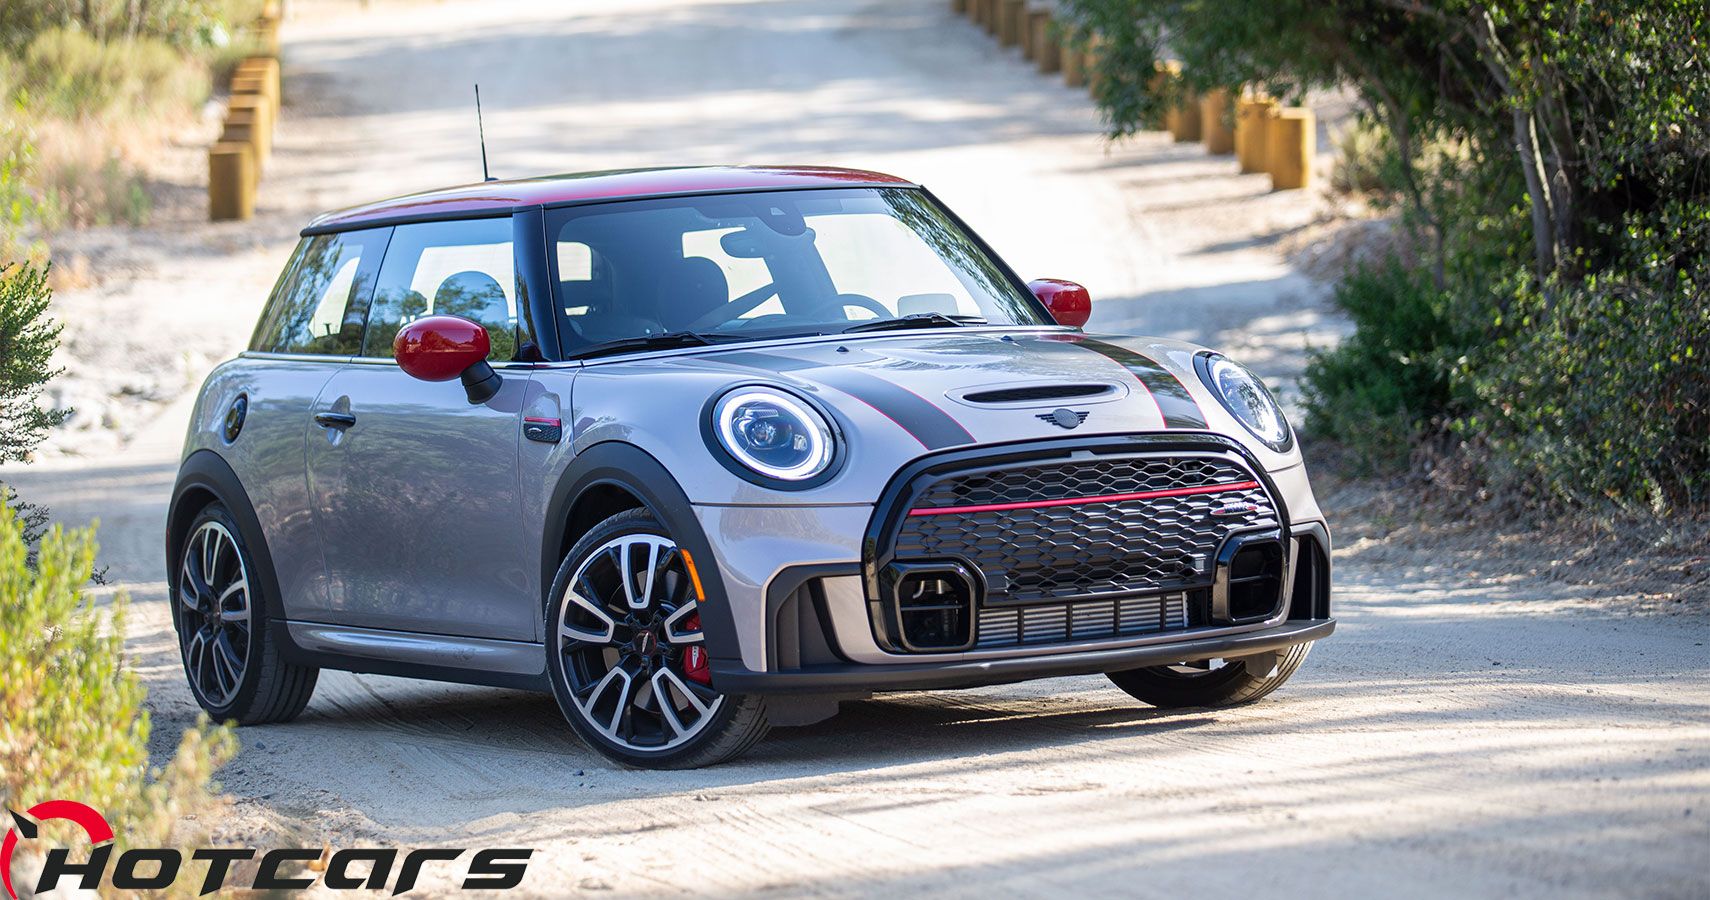 2022 Mini Cooper JCW Review: Capable Hot Hatch With Tons Of Character